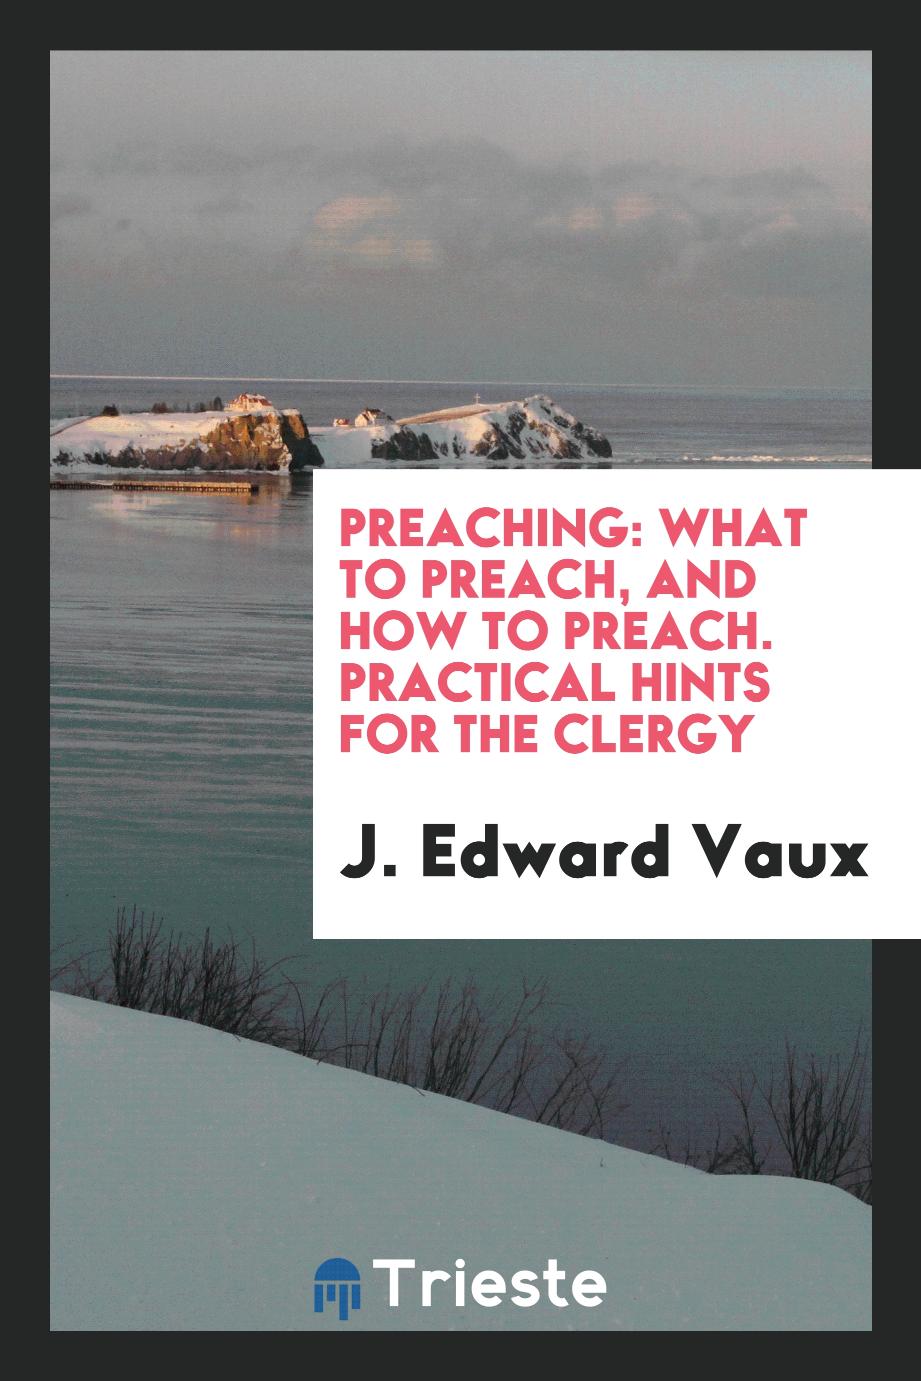 Preaching: What to Preach, and How to Preach. Practical Hints for the Clergy